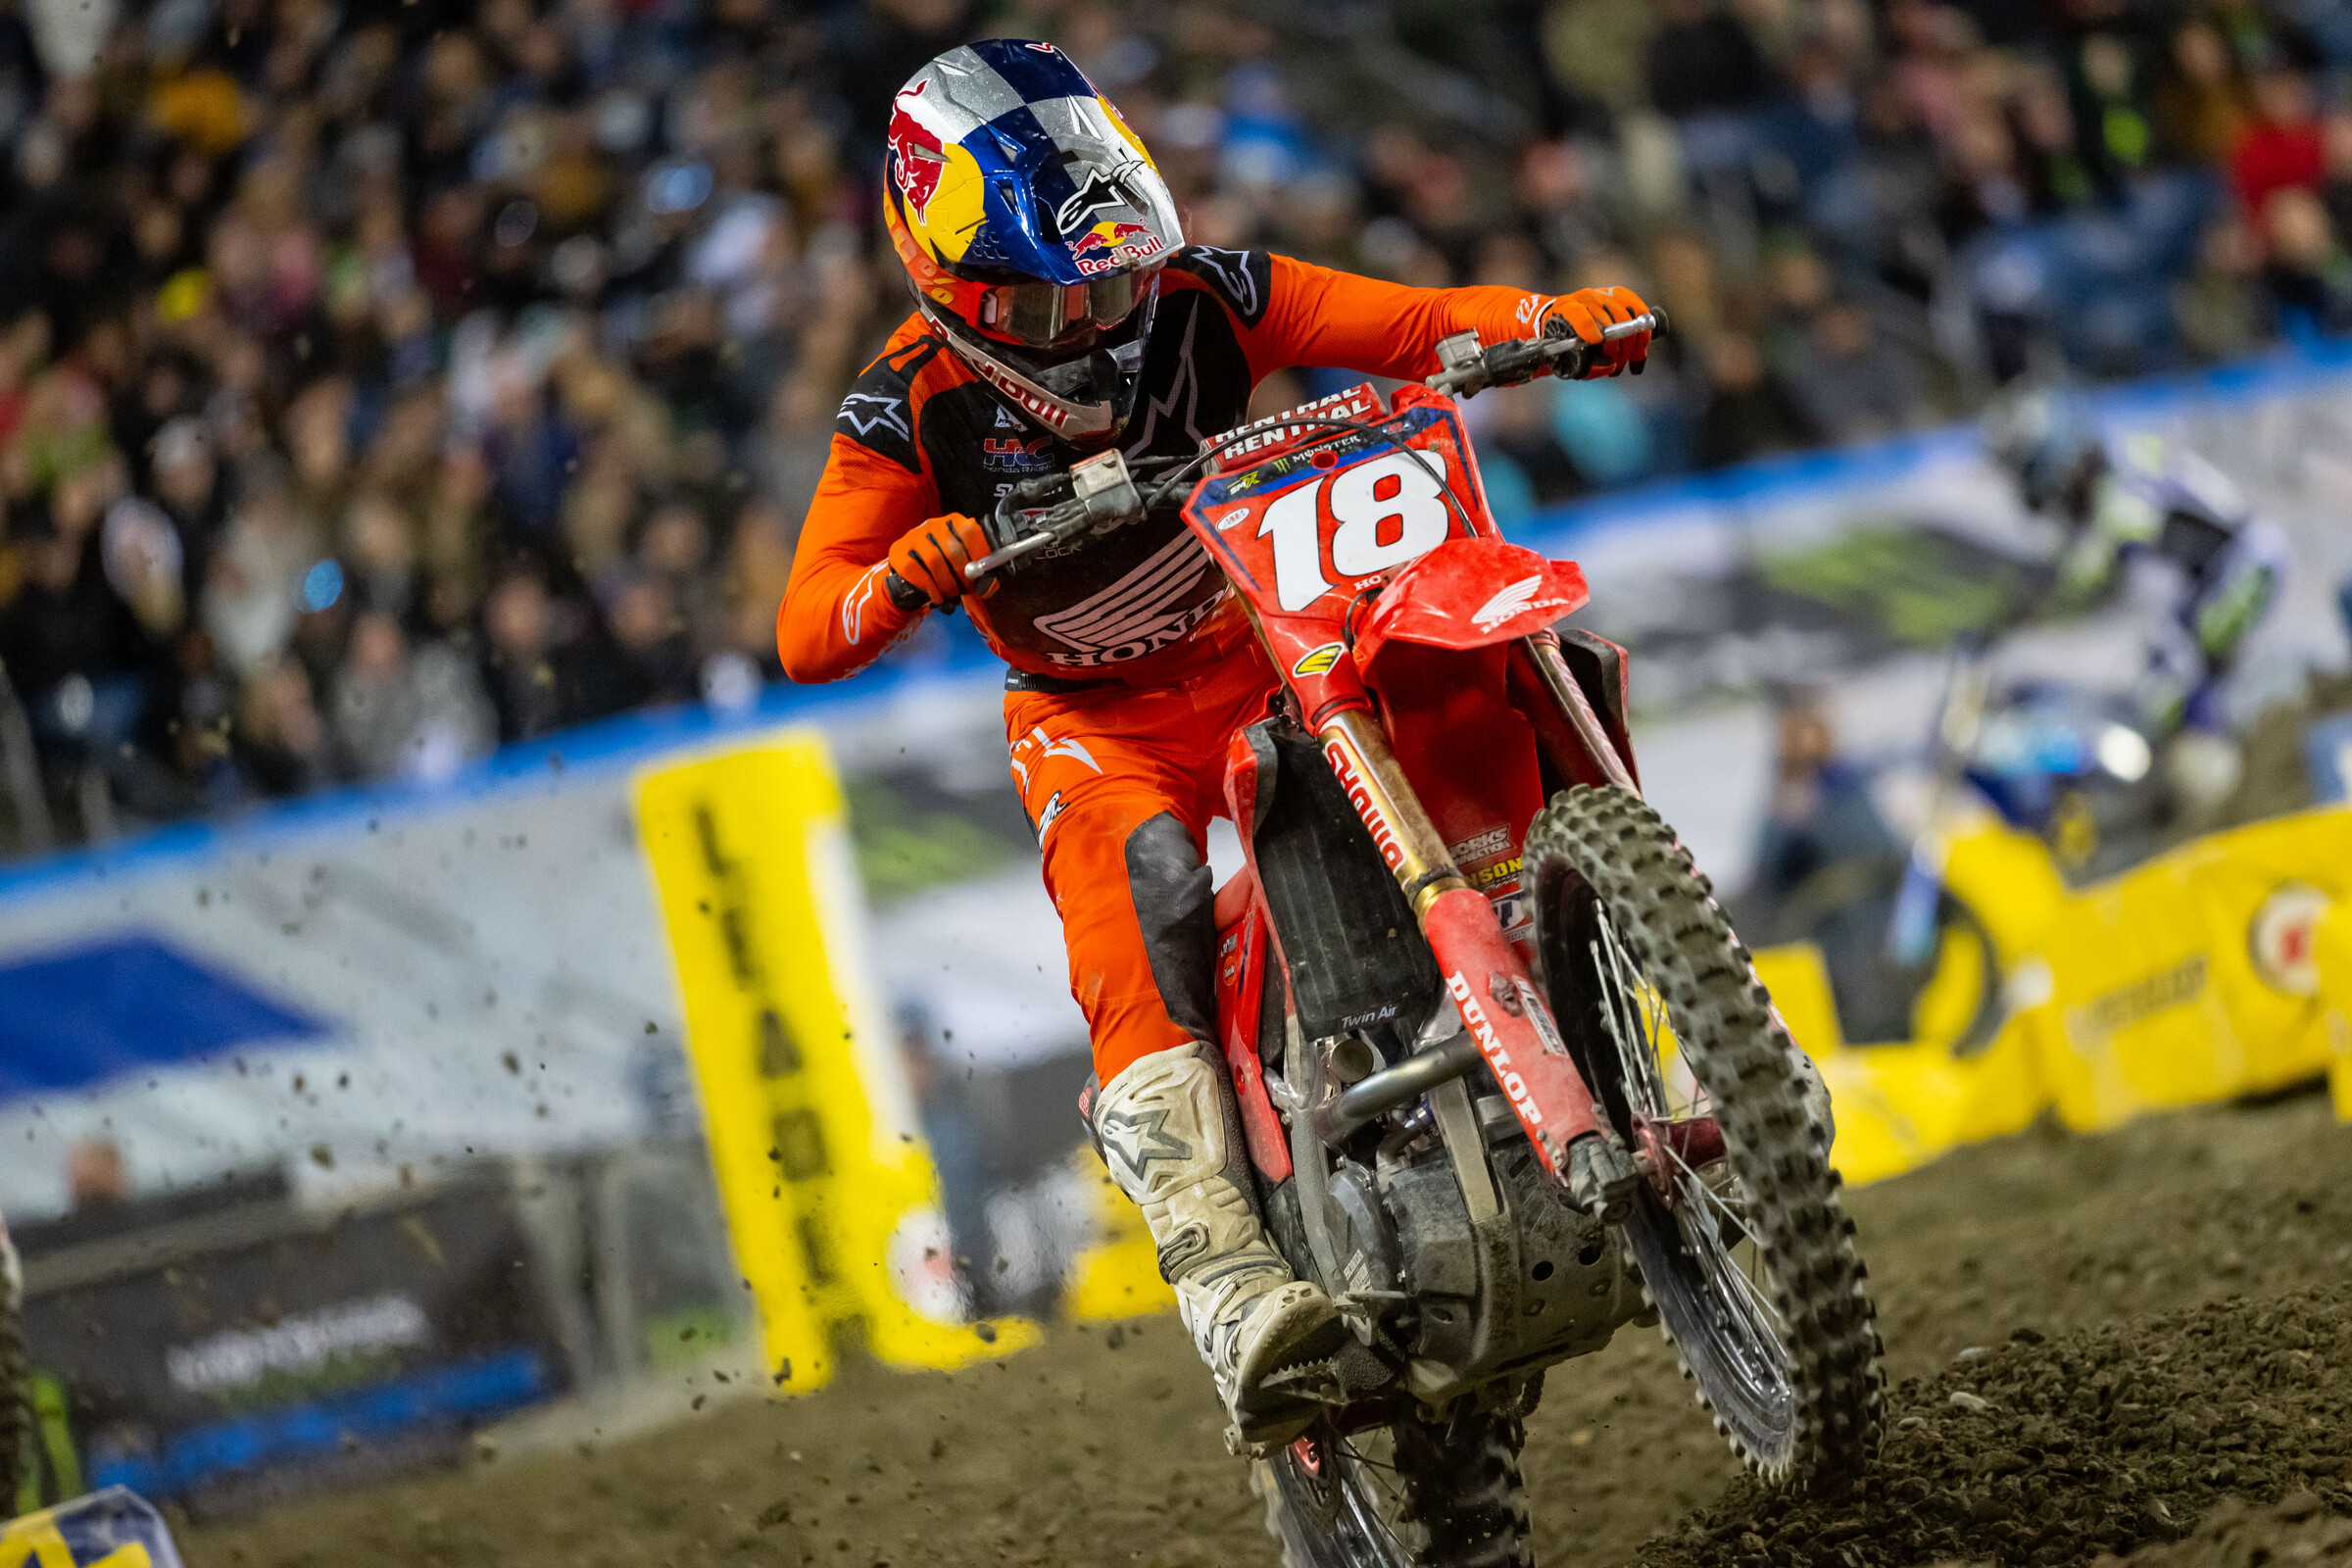 How to Watch/Stream Glendale SX and MXGP of Switzerland on TV